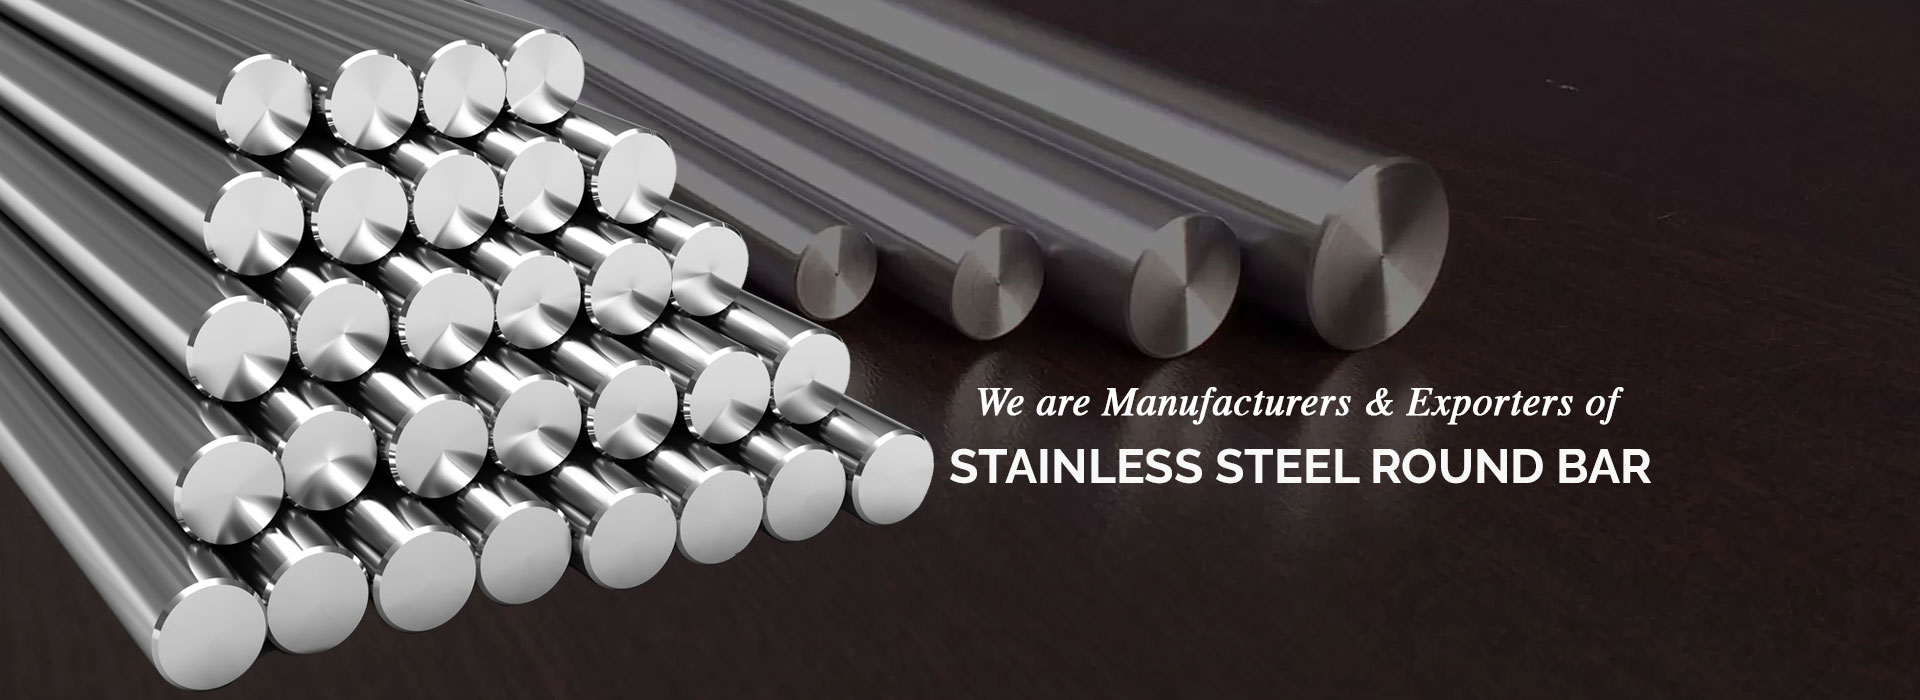 Stainless Steel Round Bar Manufacturers in Europe